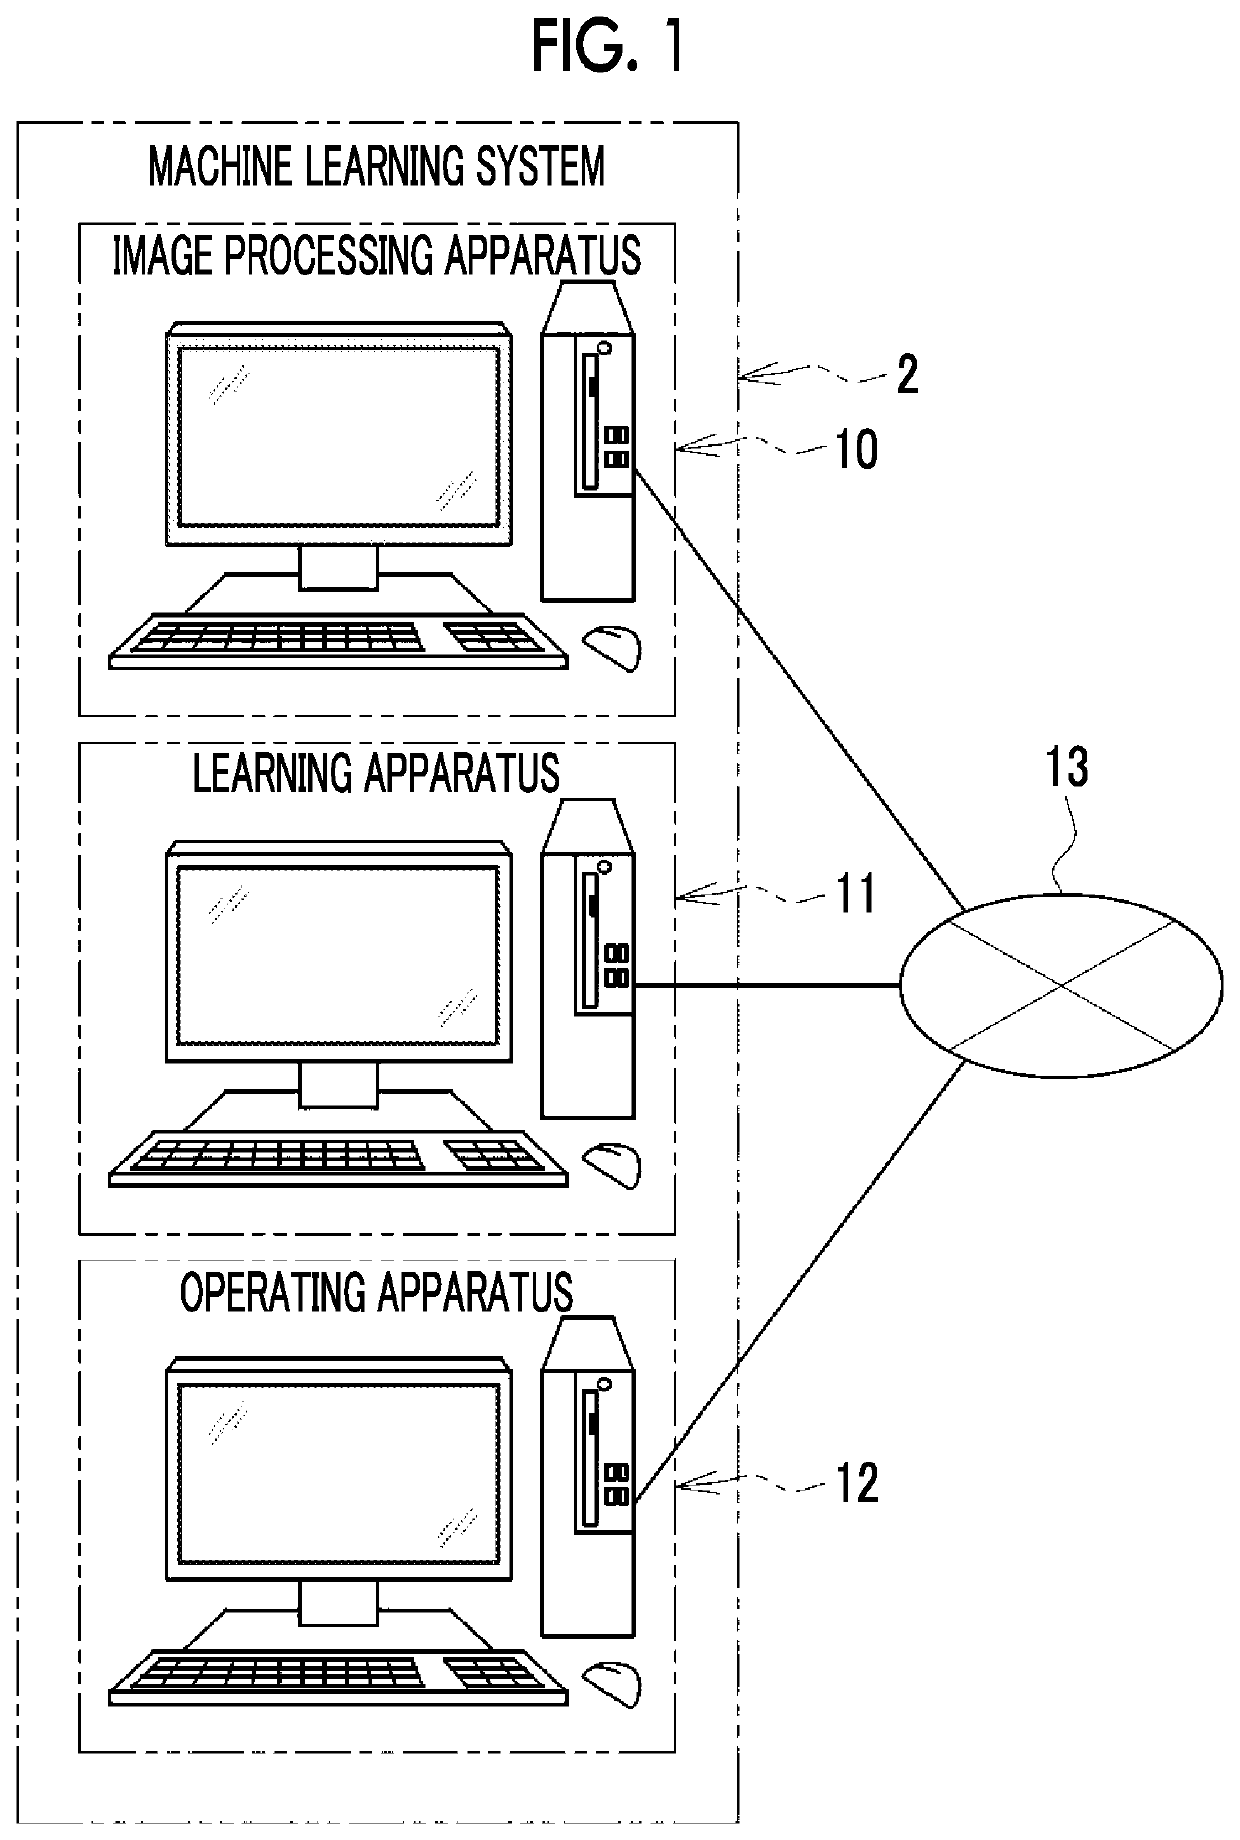 Image processing apparatus, and operation method and operating program thereof, operating apparatus, and operation method and operating program thereof, and machine learning system